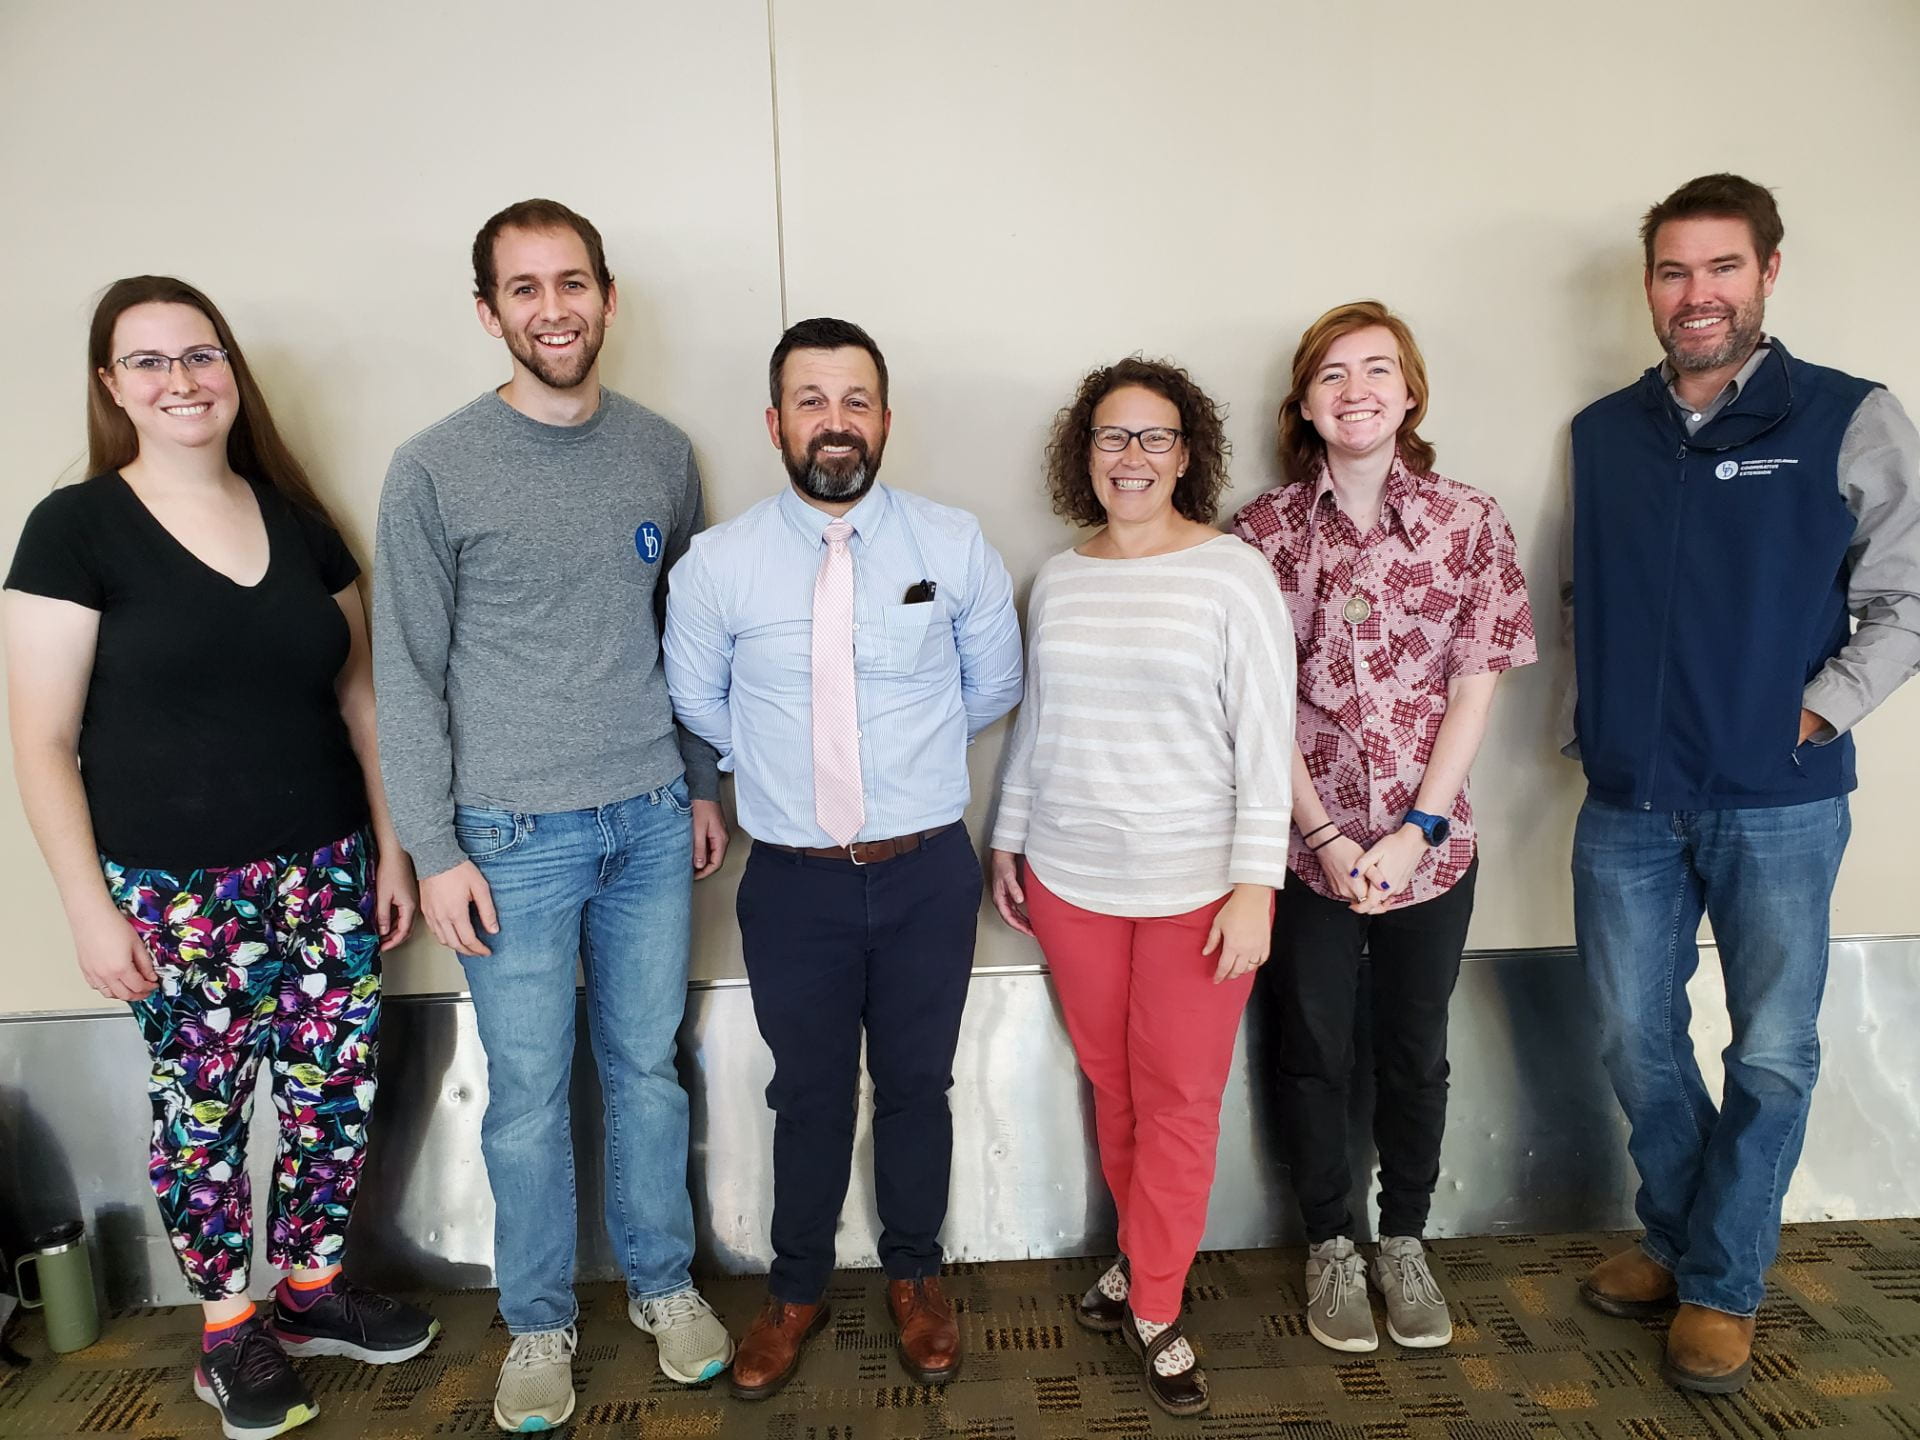 Pictured from left to right: L. Mosesso (former graduate student), J. Newswanger (graduate student), J. Emerson (Extension agent/graduate student), Dr. A. Shober; W. Blew (graduate student), and Dr. J. Miller. Not pictured: S. Riggi (Extension agent), H. Gibson (Extension program coordinator), and research technician S. Tingle.